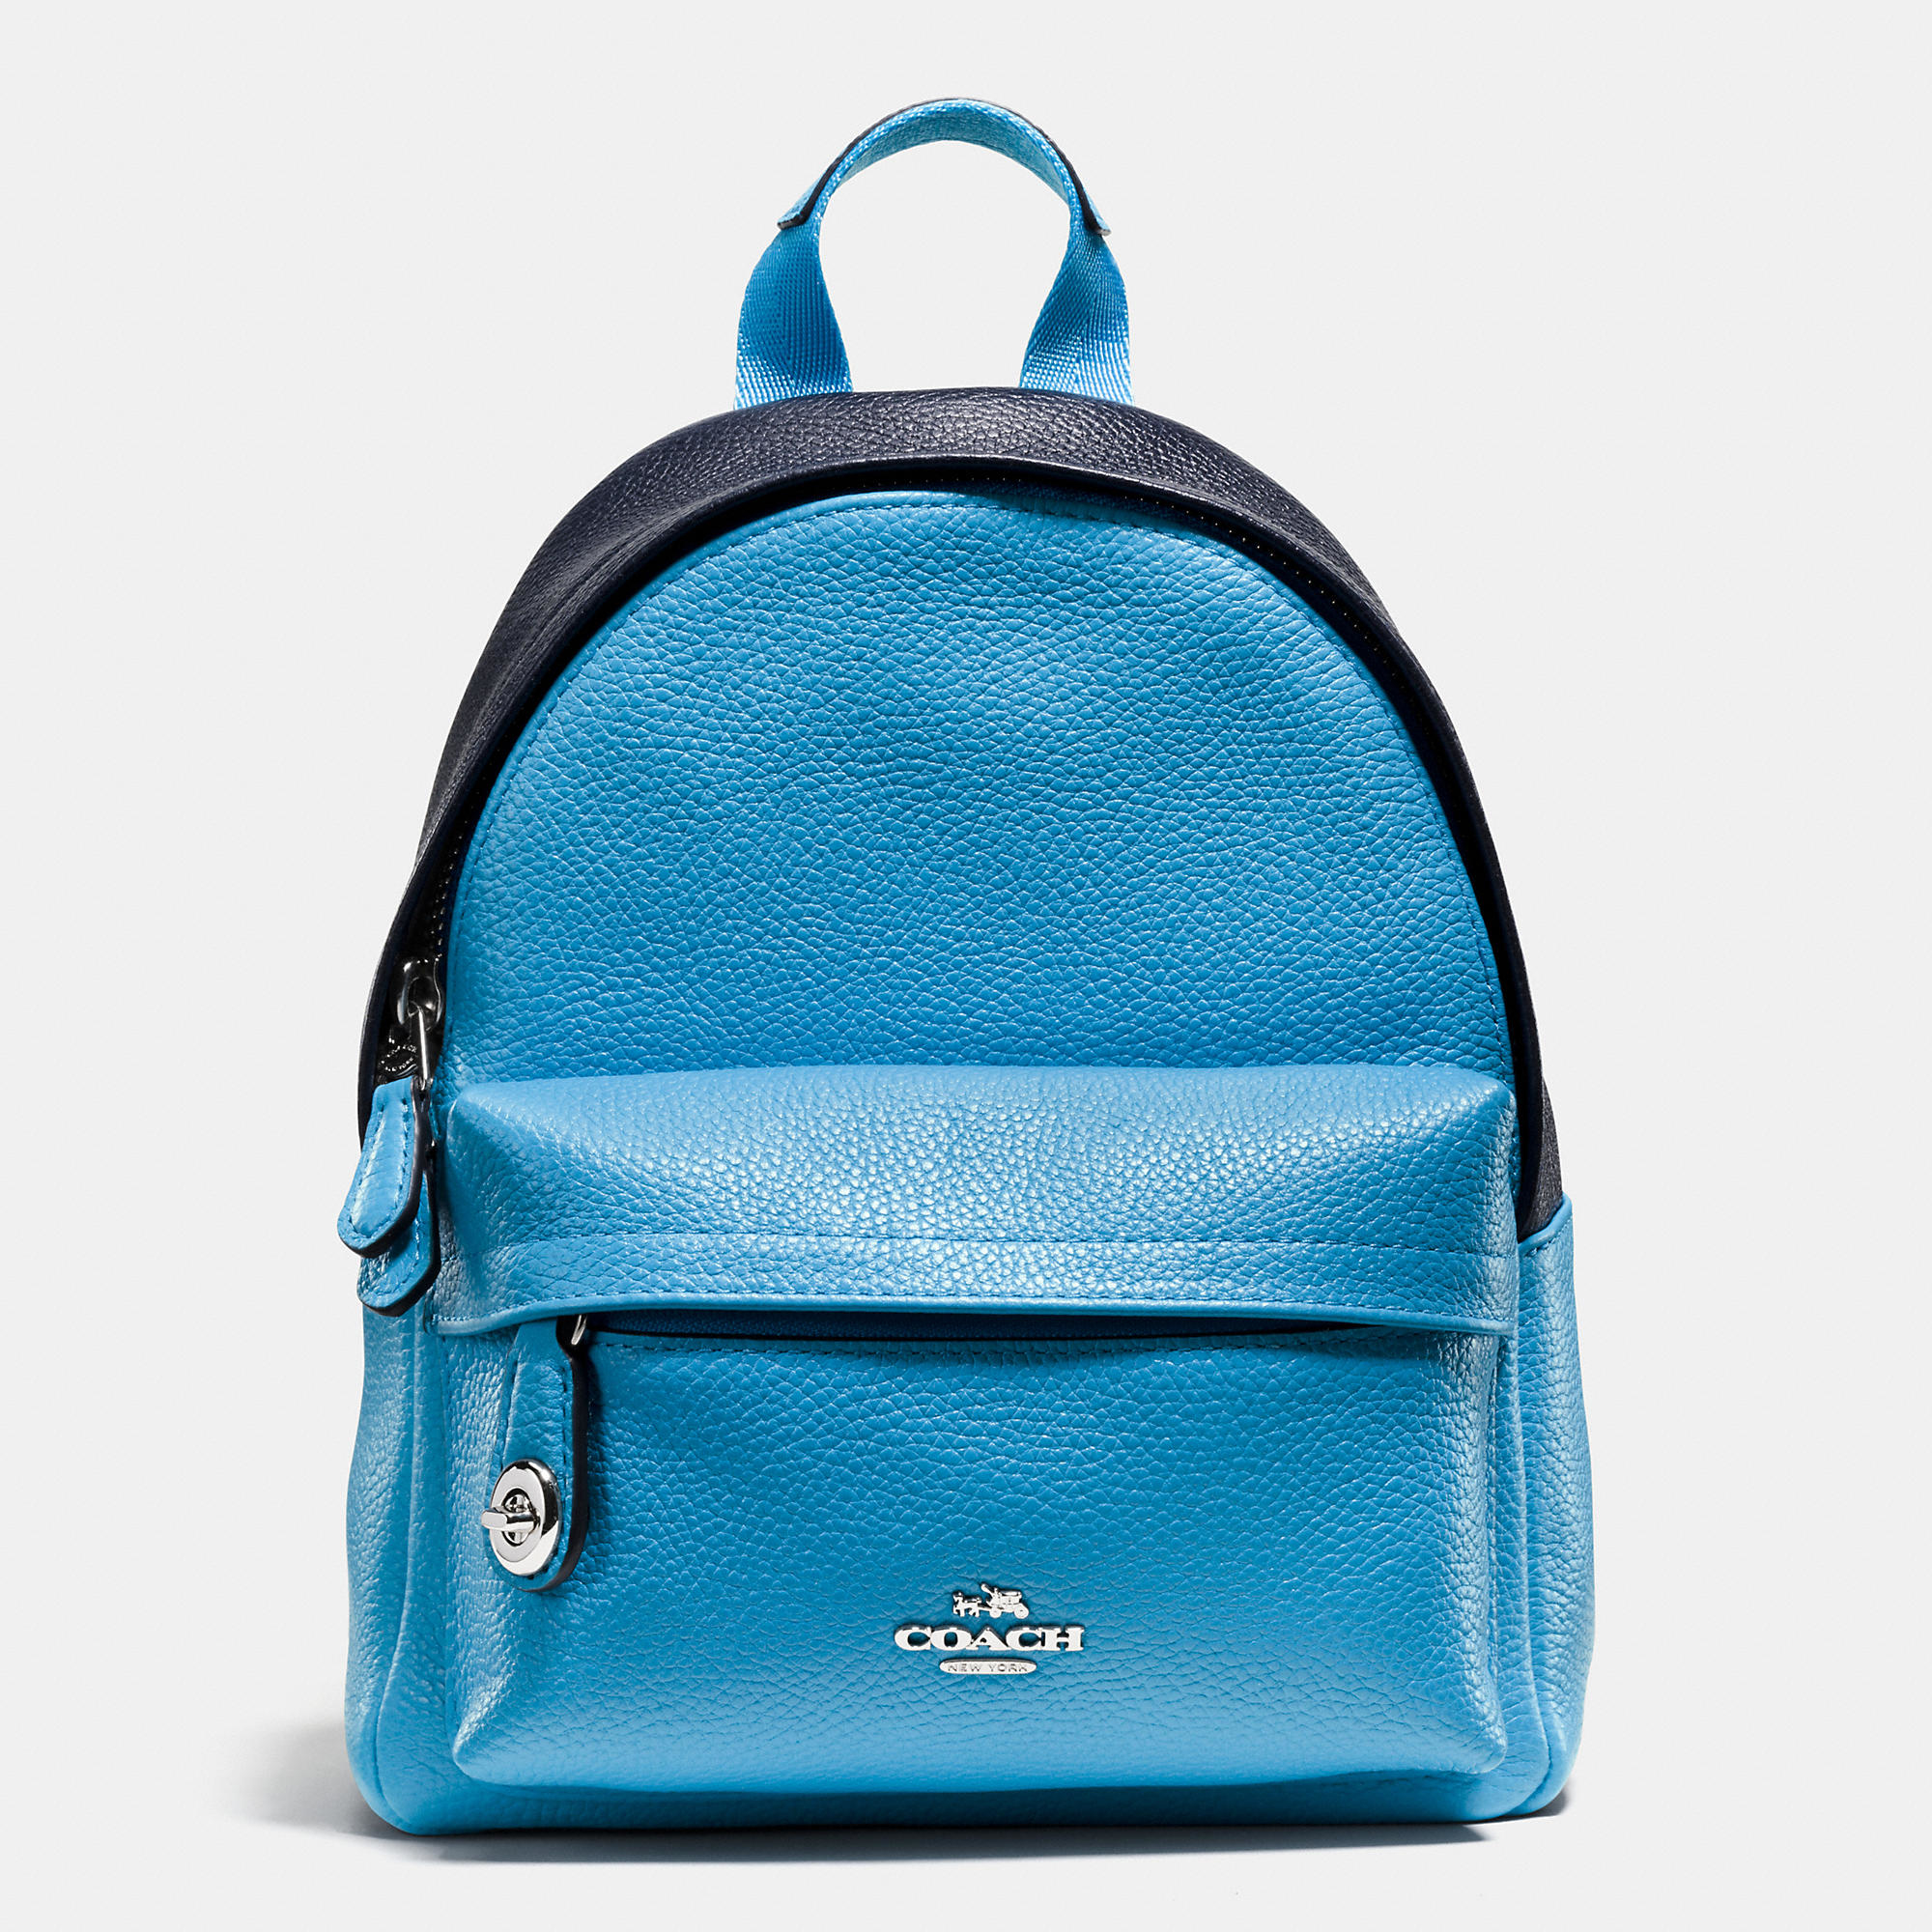 COACH Mini Campus Backpack In Bicolor Leather in Blue | Lyst